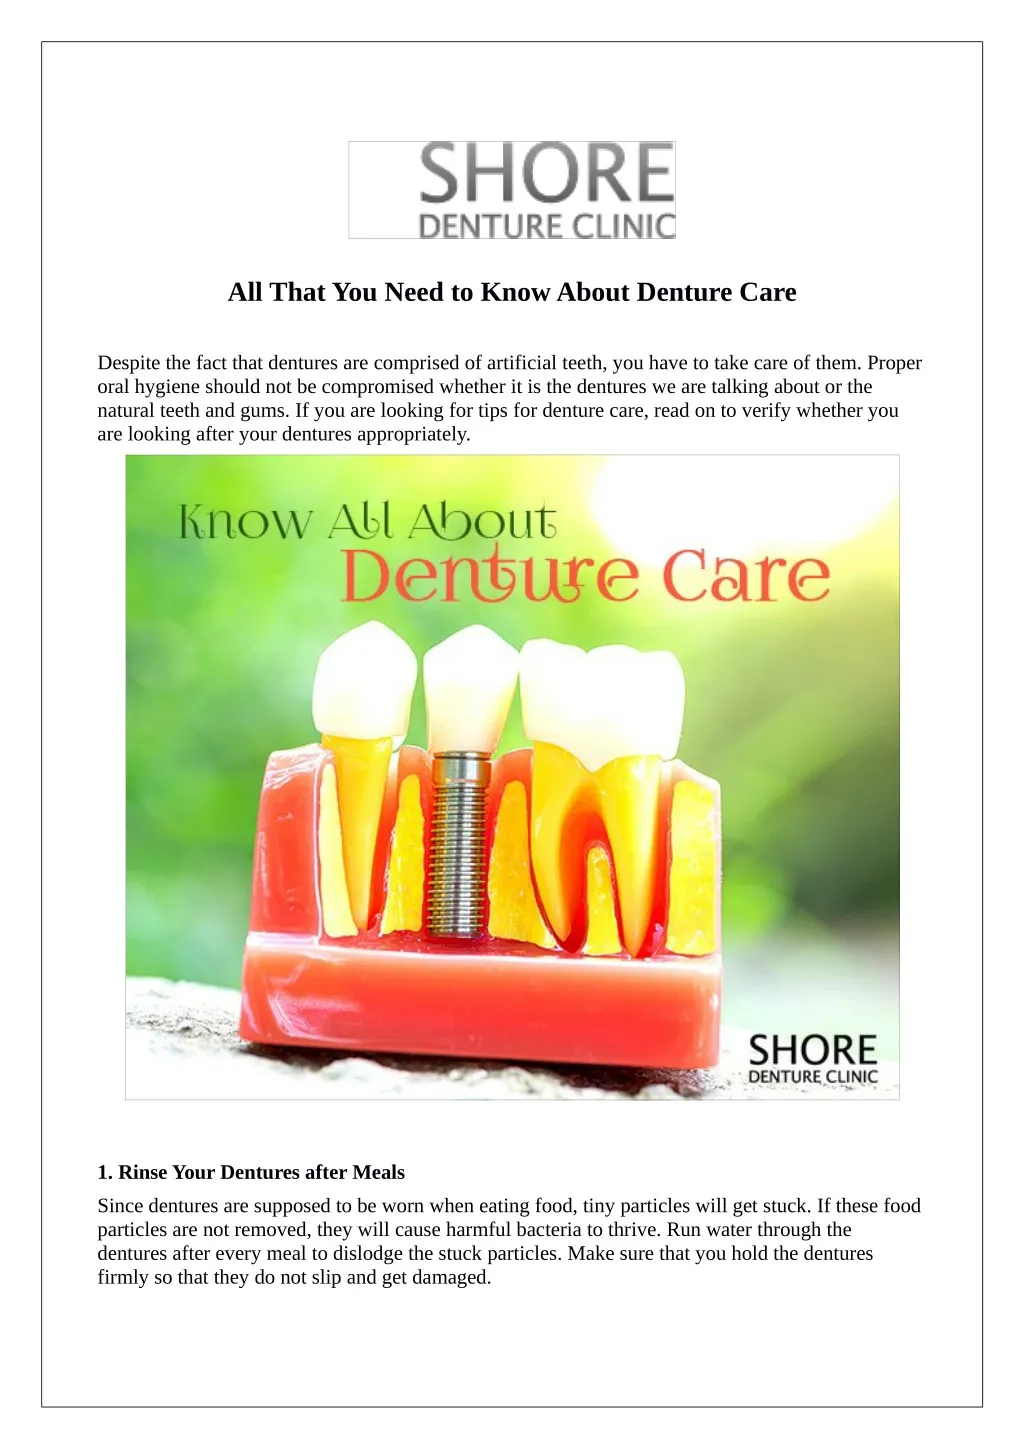 all that you need to know about denture care